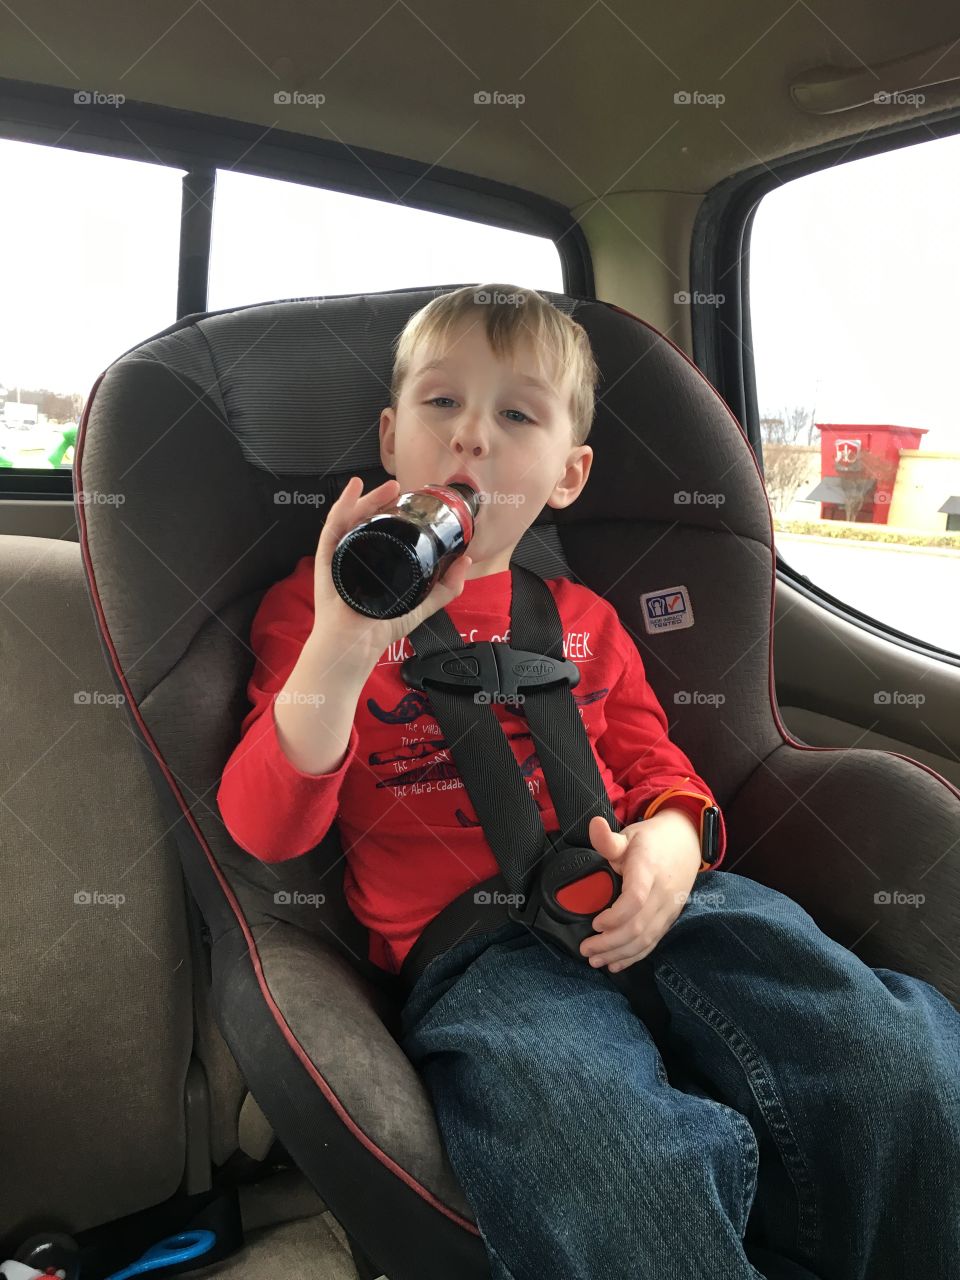 A toddler and a coke 